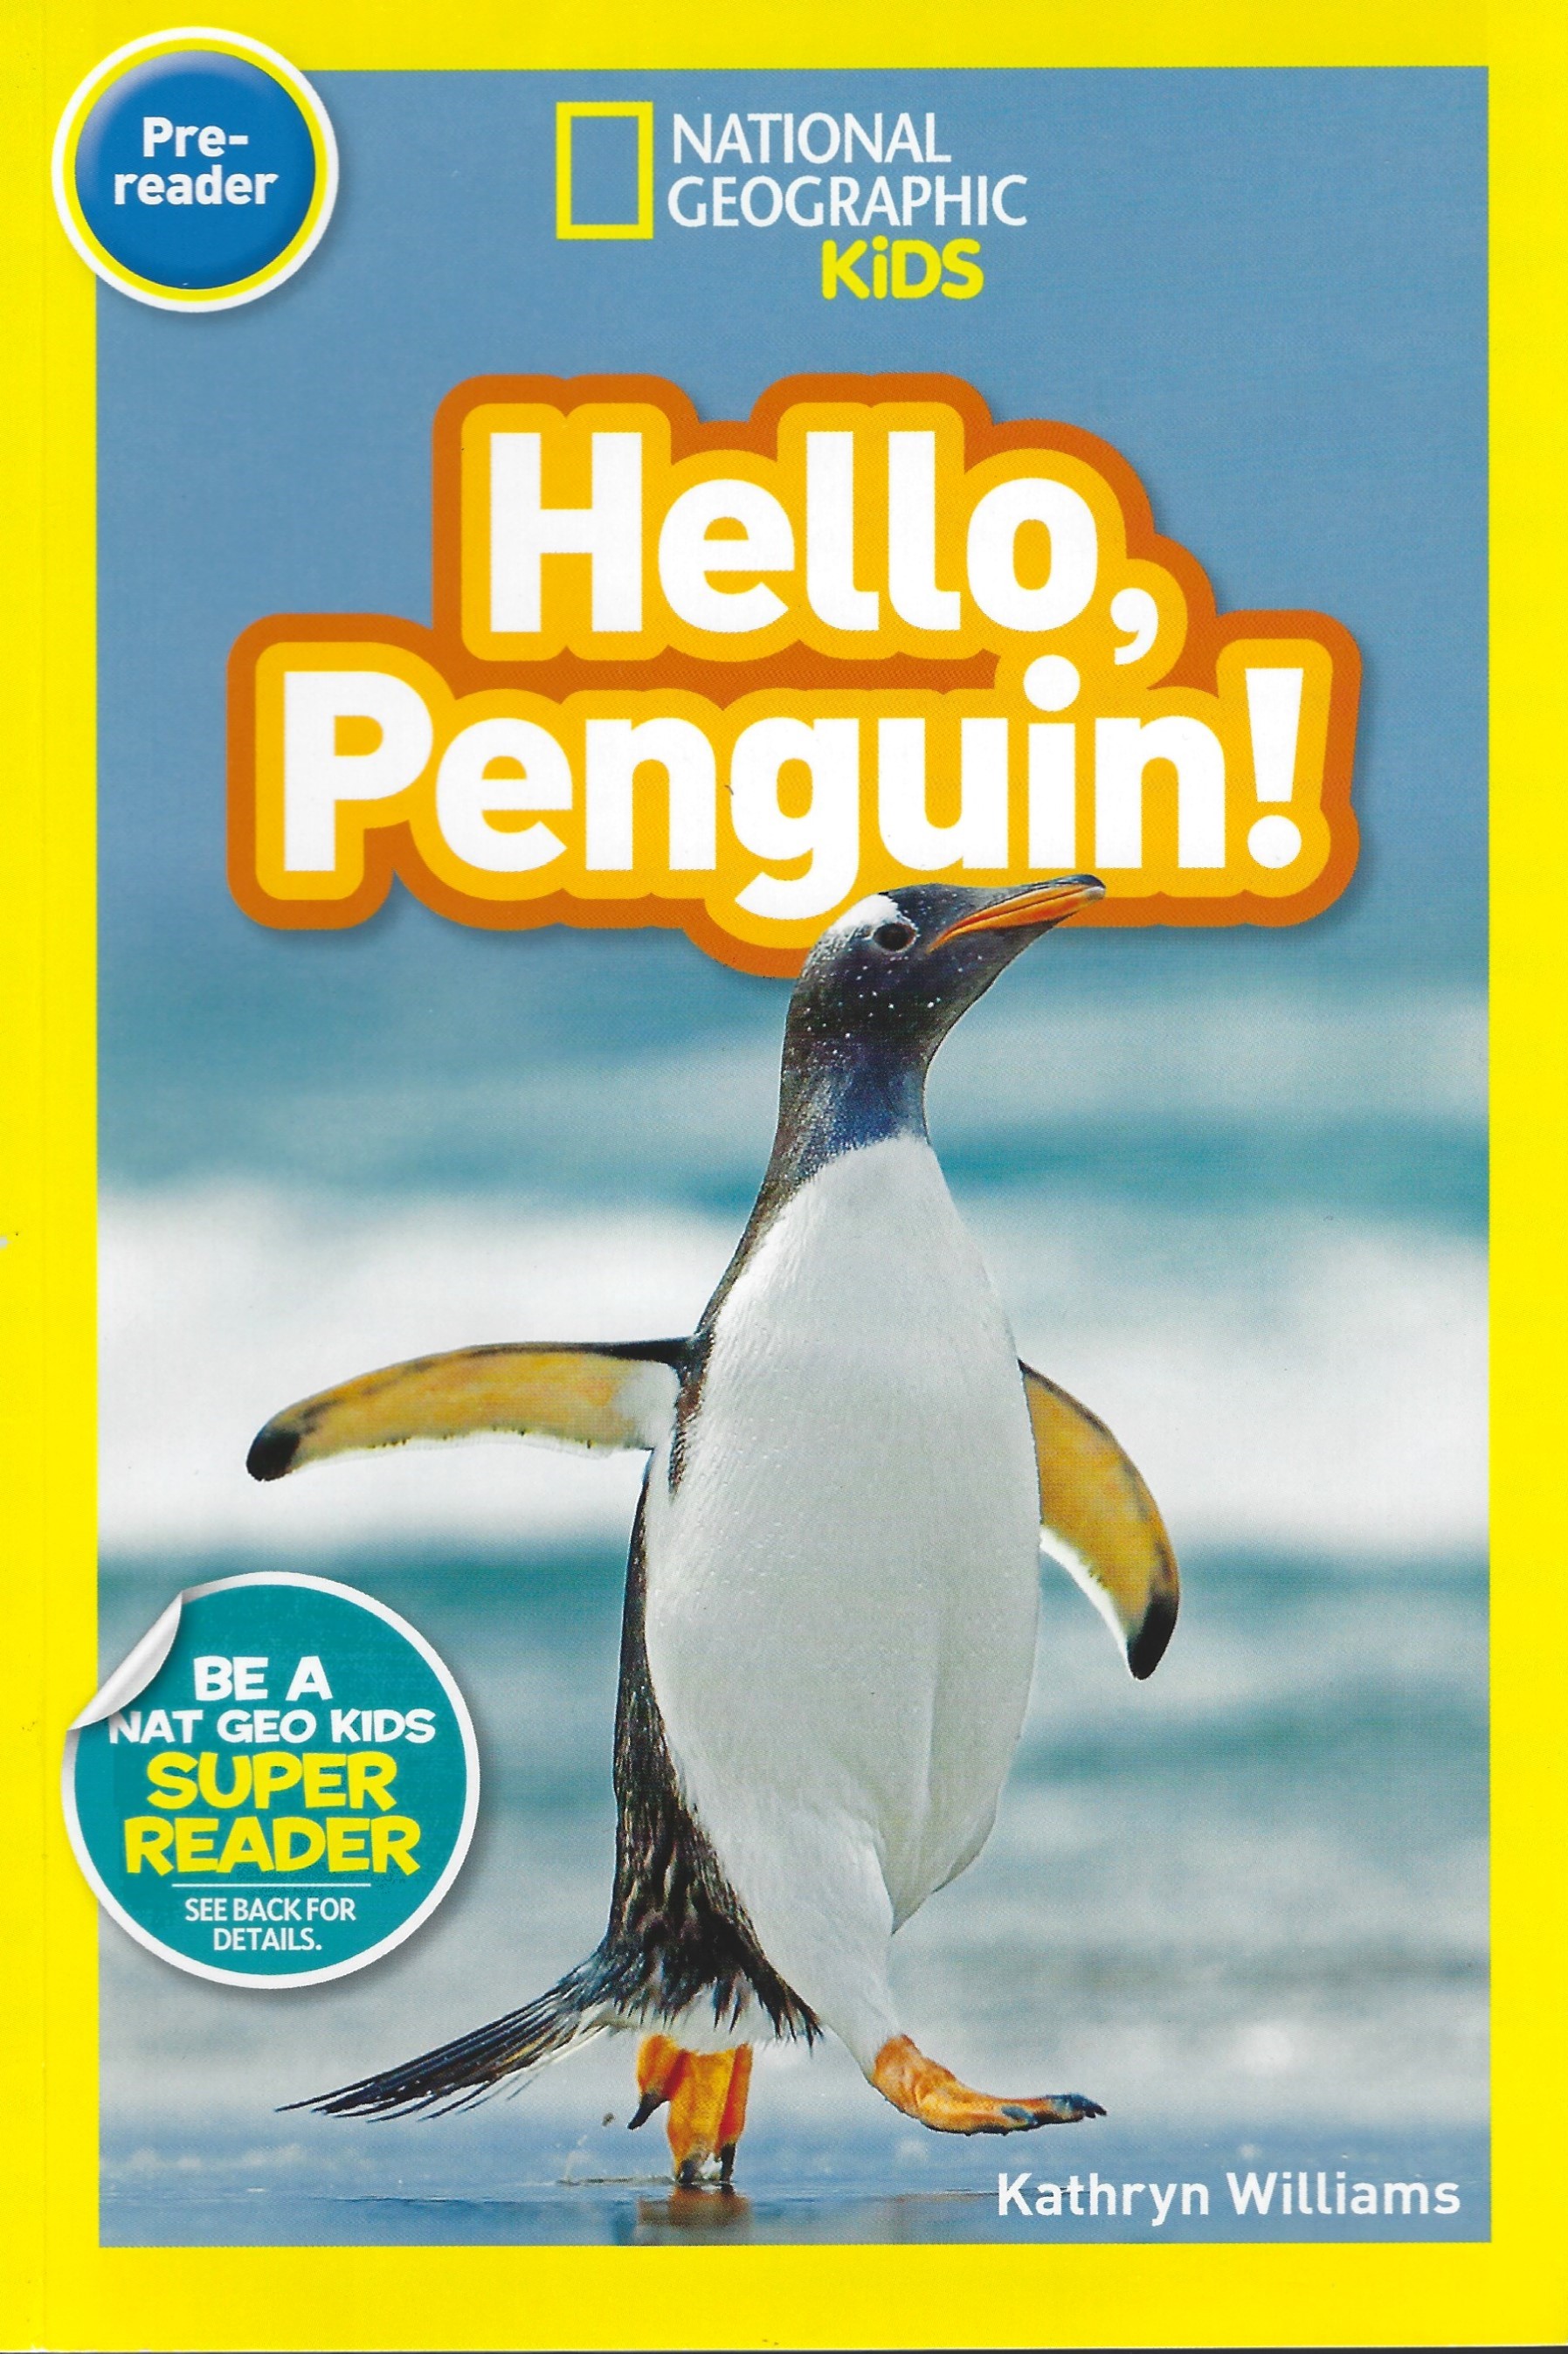 National Geographic Kids: Hello, Penguin